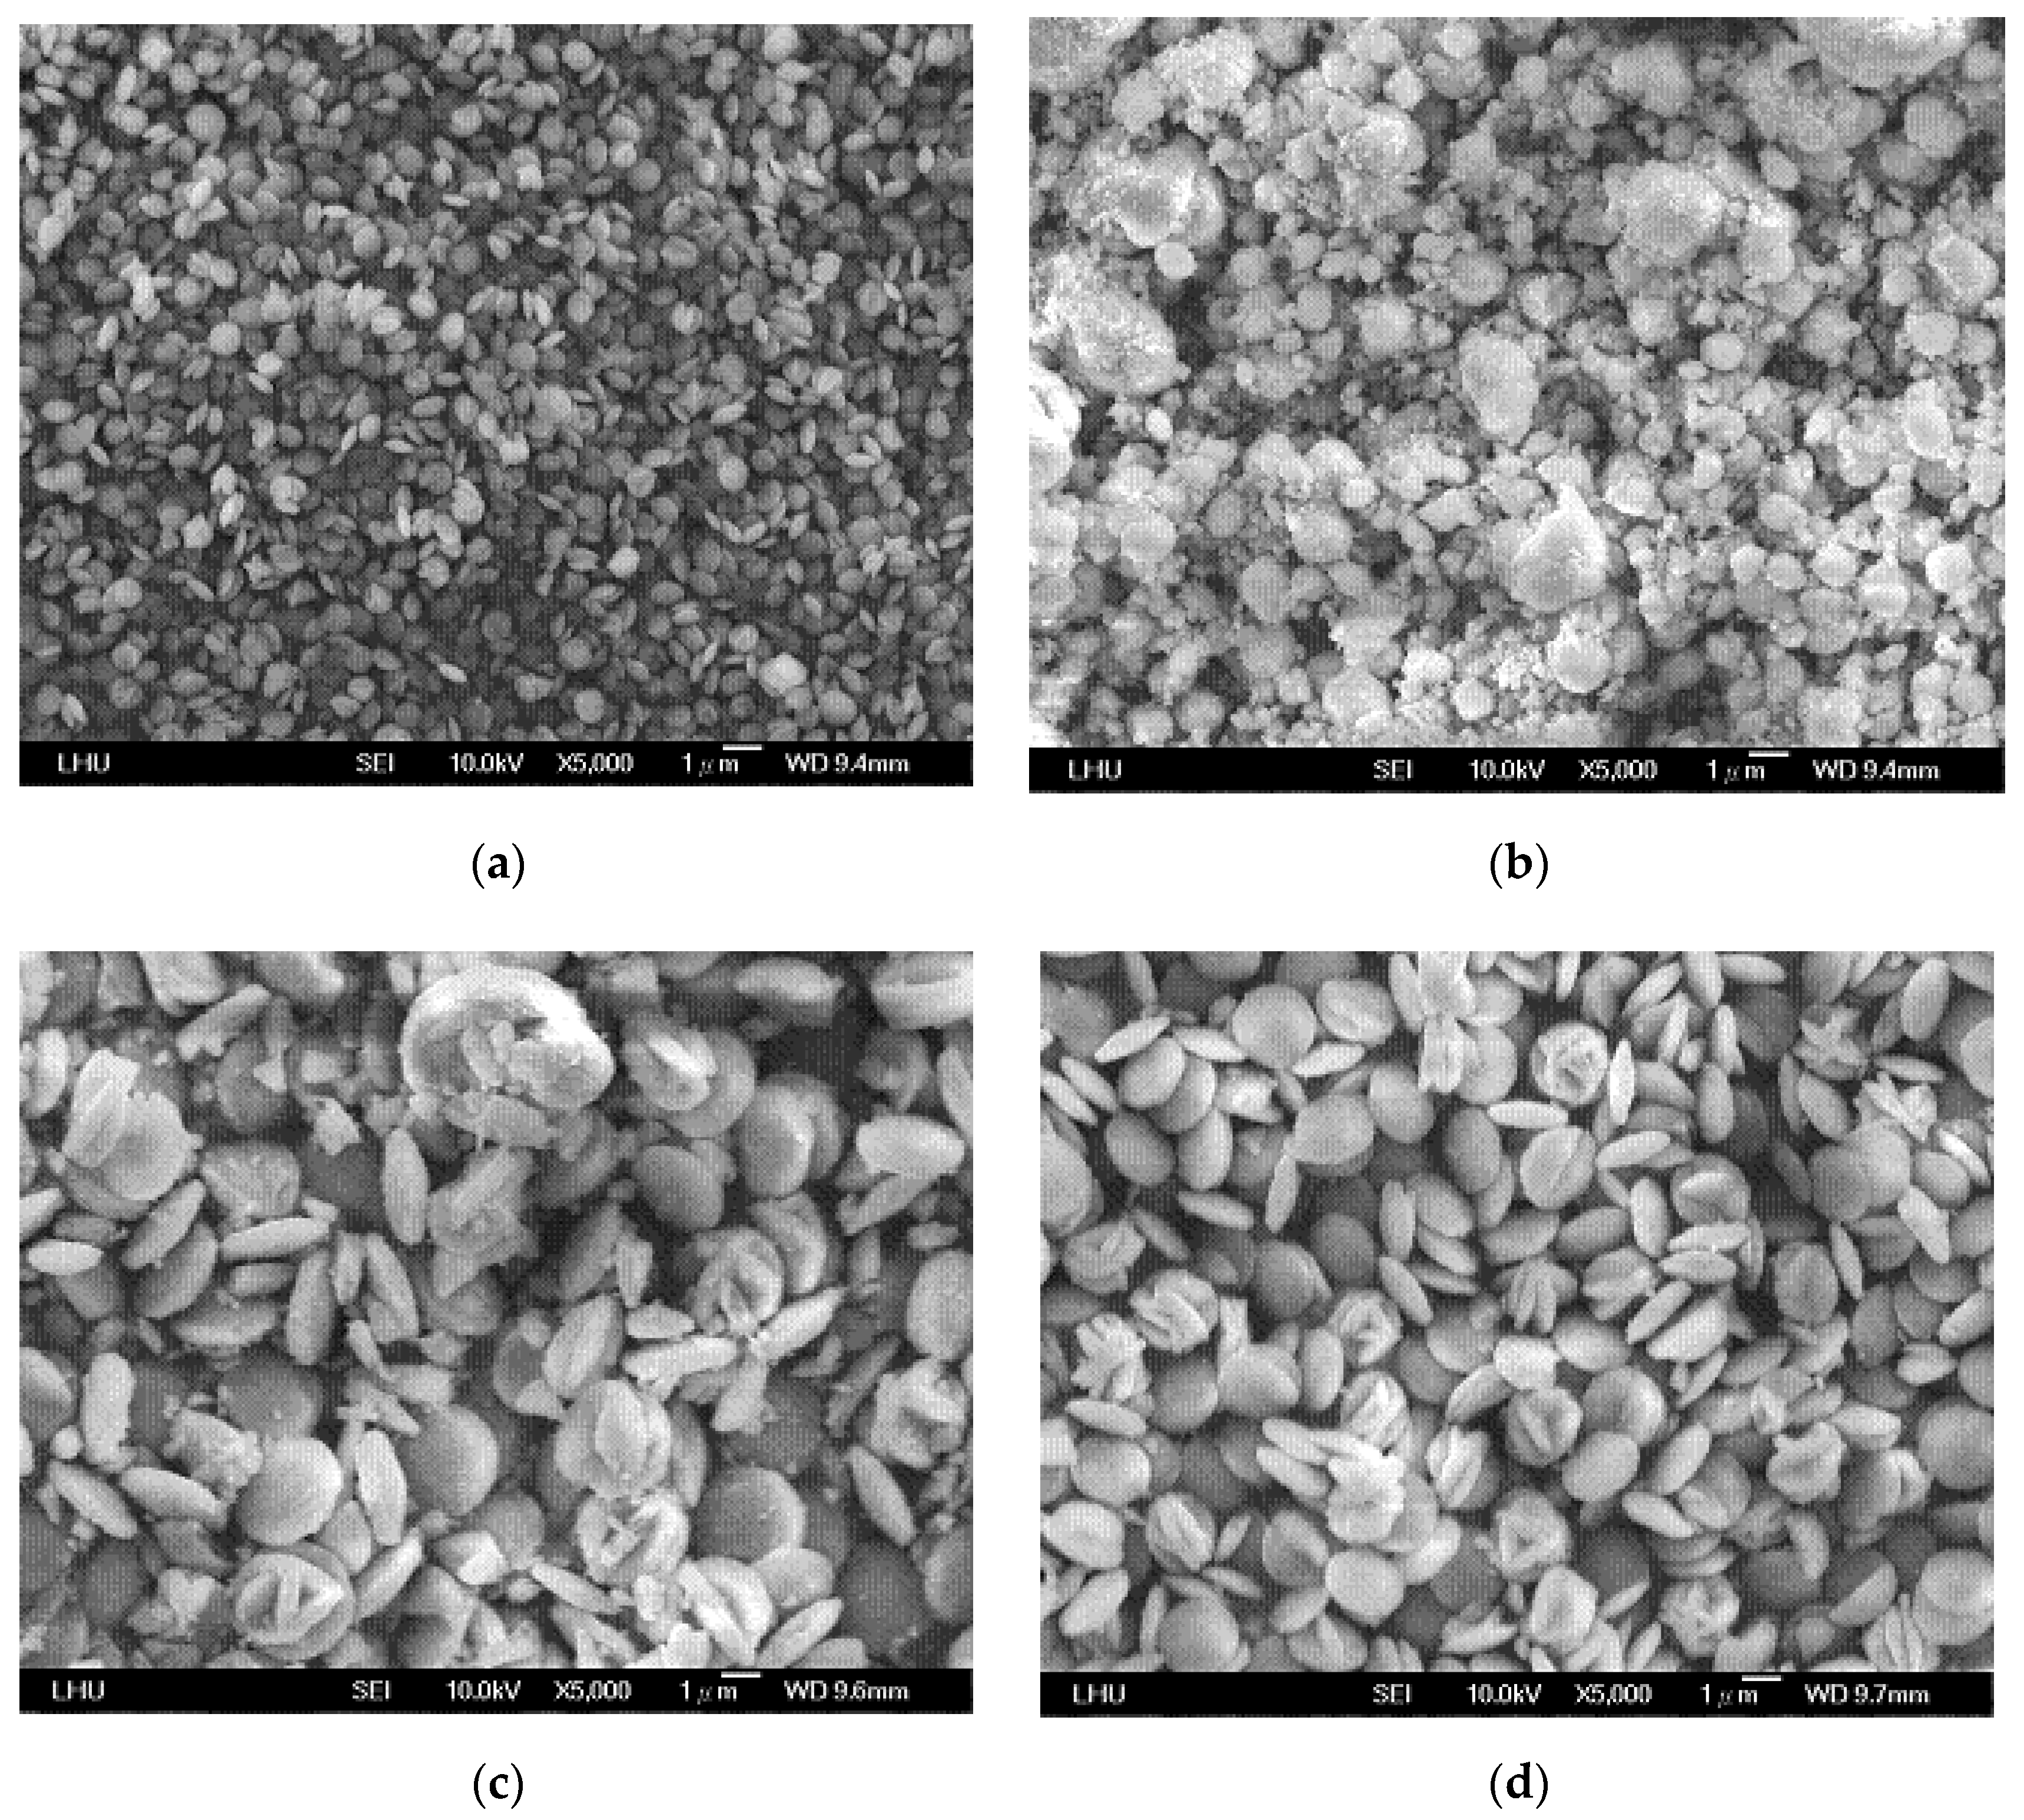 Crystals Free Full Text Co2 Capture In A Bubble Column Scrubber Using Mea Cacl2 H2o Solution Absorption And Precipitation Html